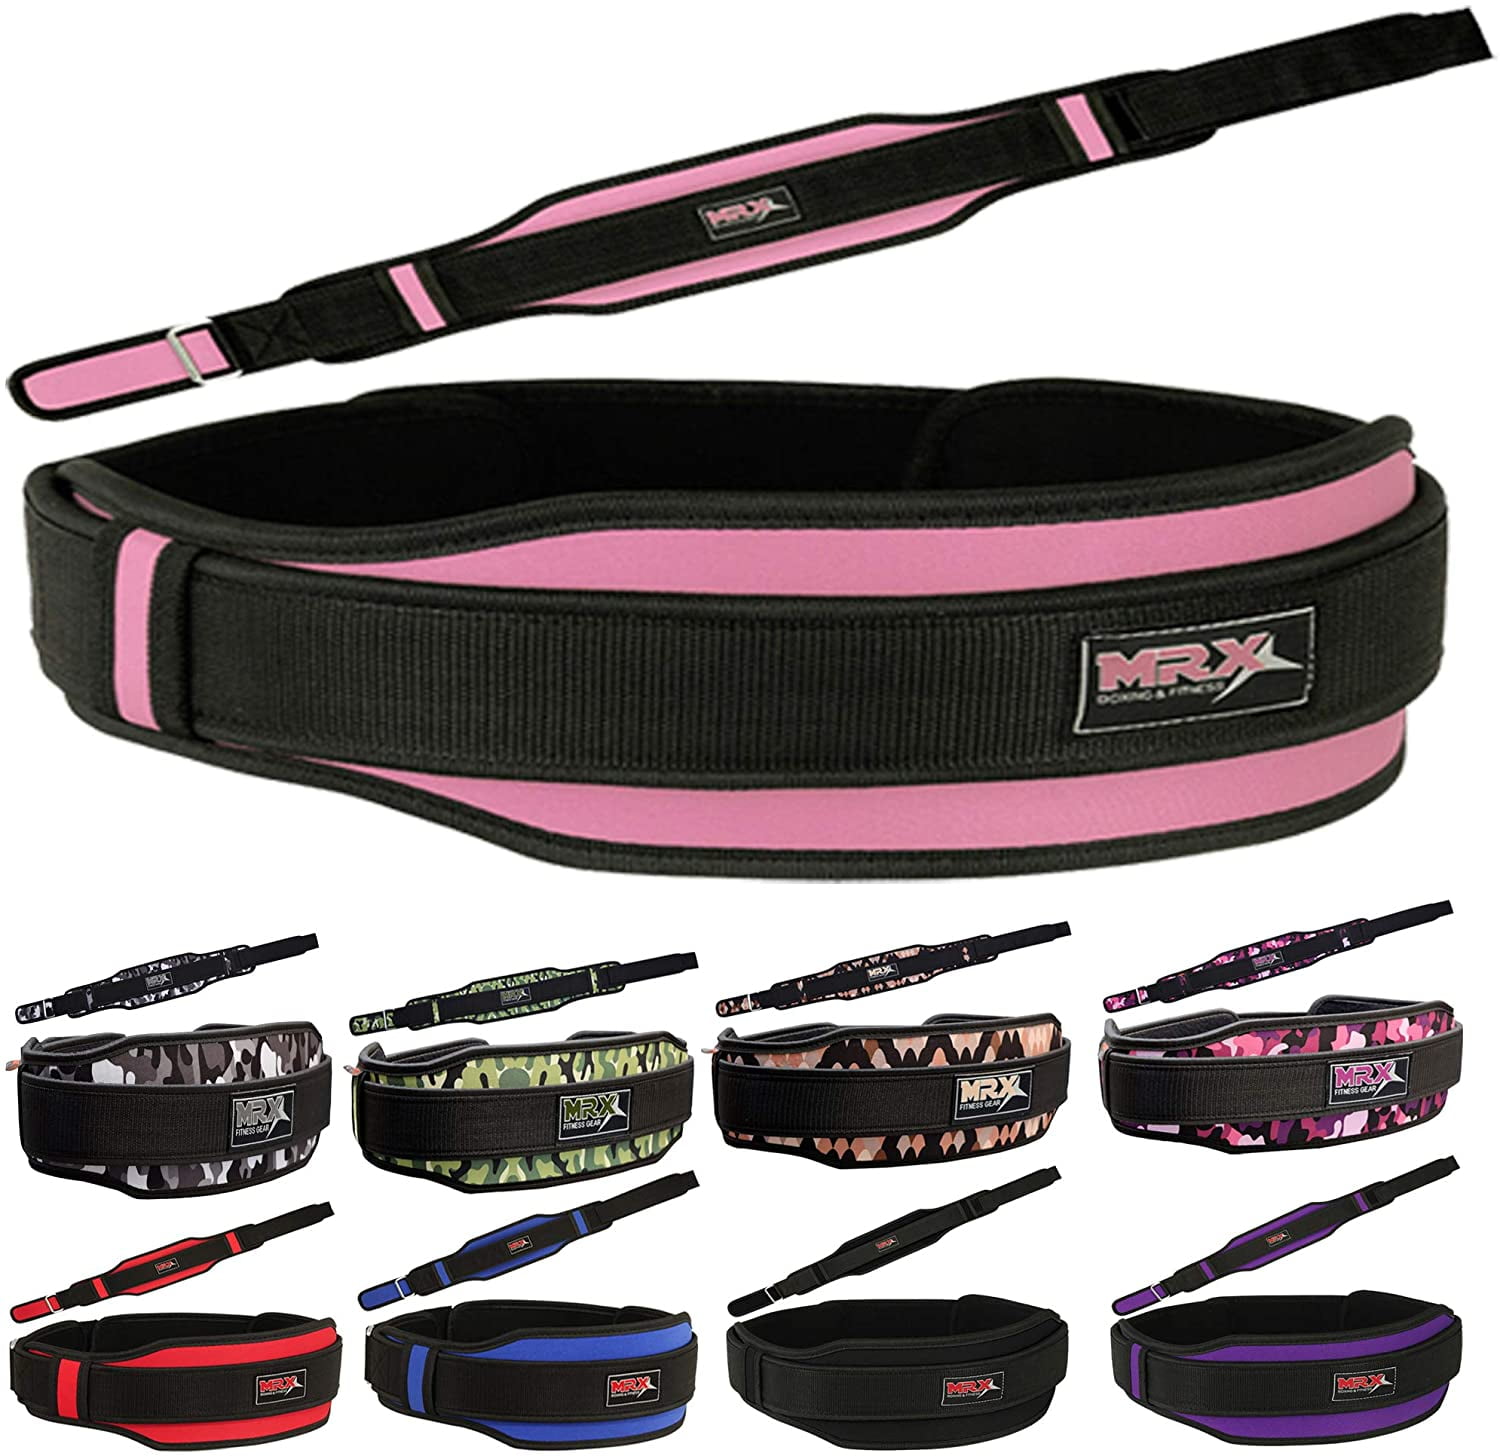 Details about   RDX Dipping Weight Lifting Belt Gym Power Back Support Fitness Workout Training 